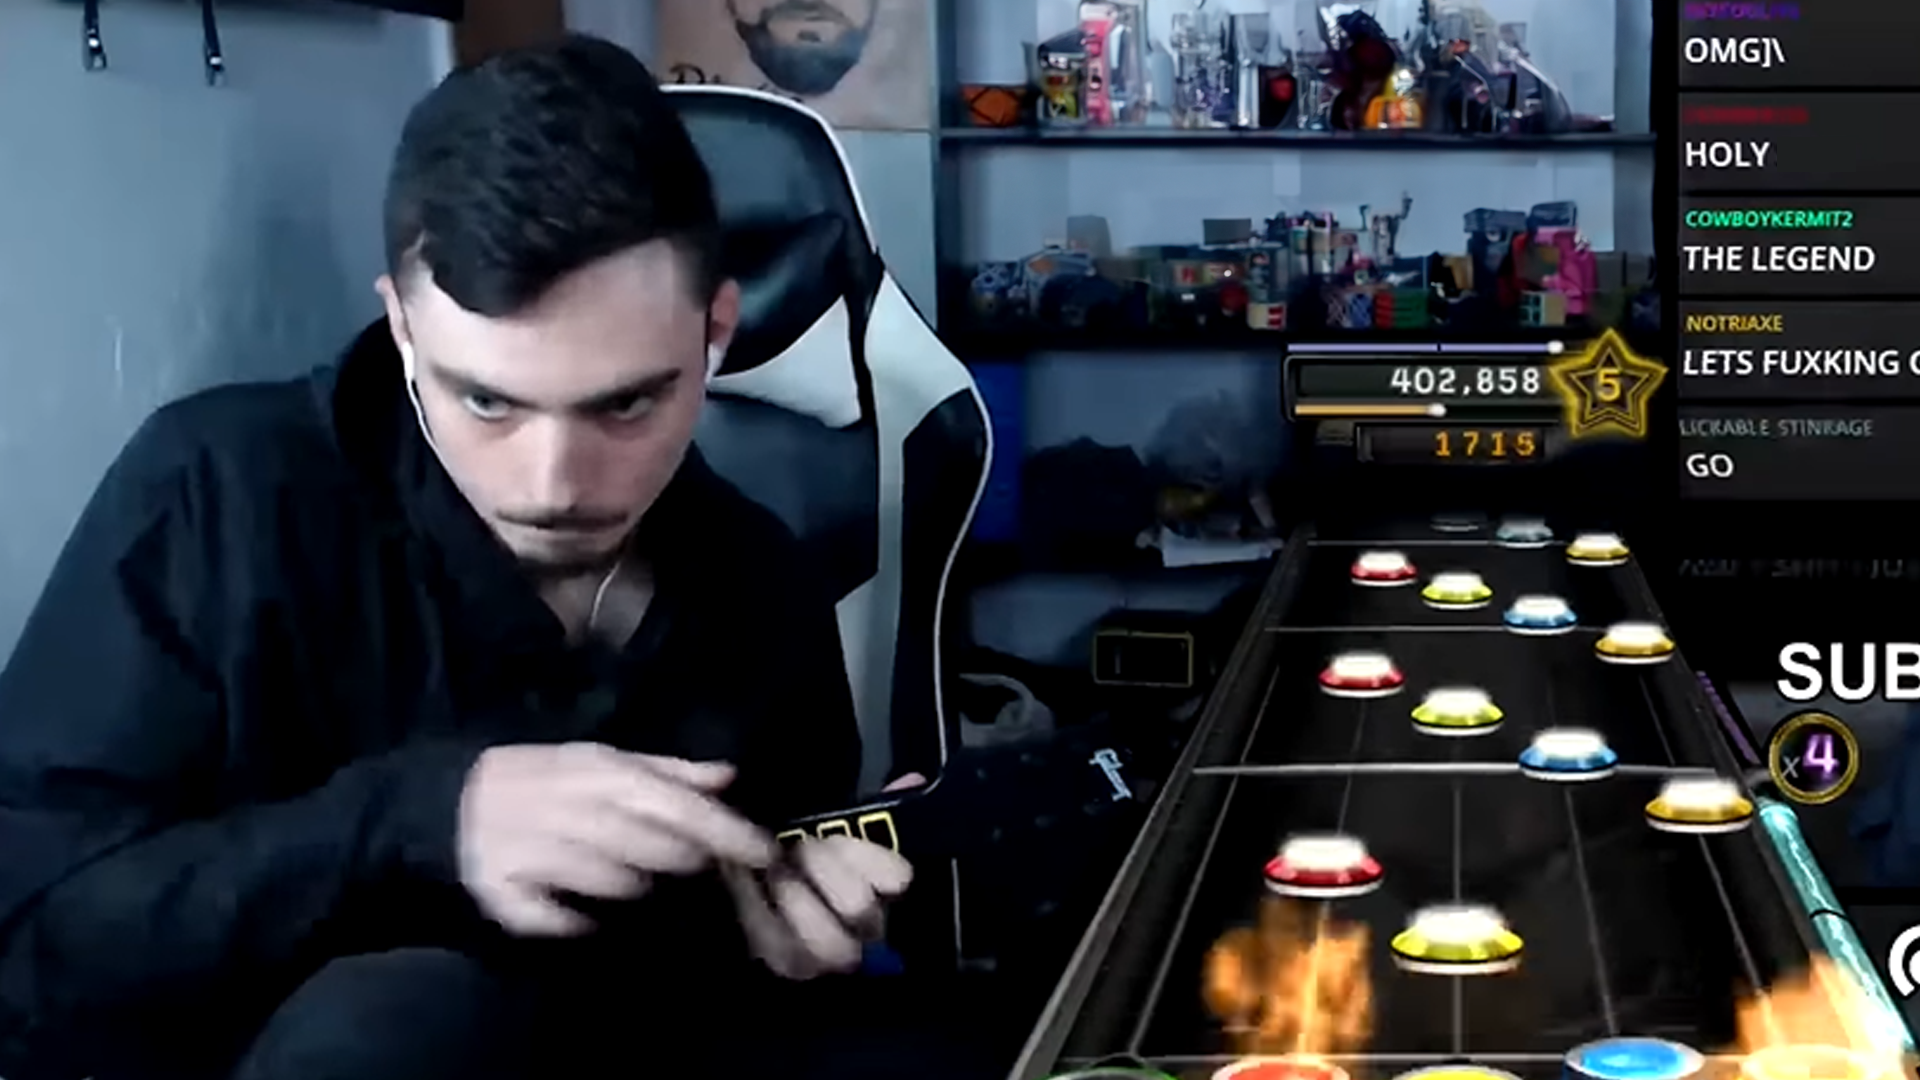 Impossible Guitar Hero Song Completed 100% By Streamer 10 Years Later